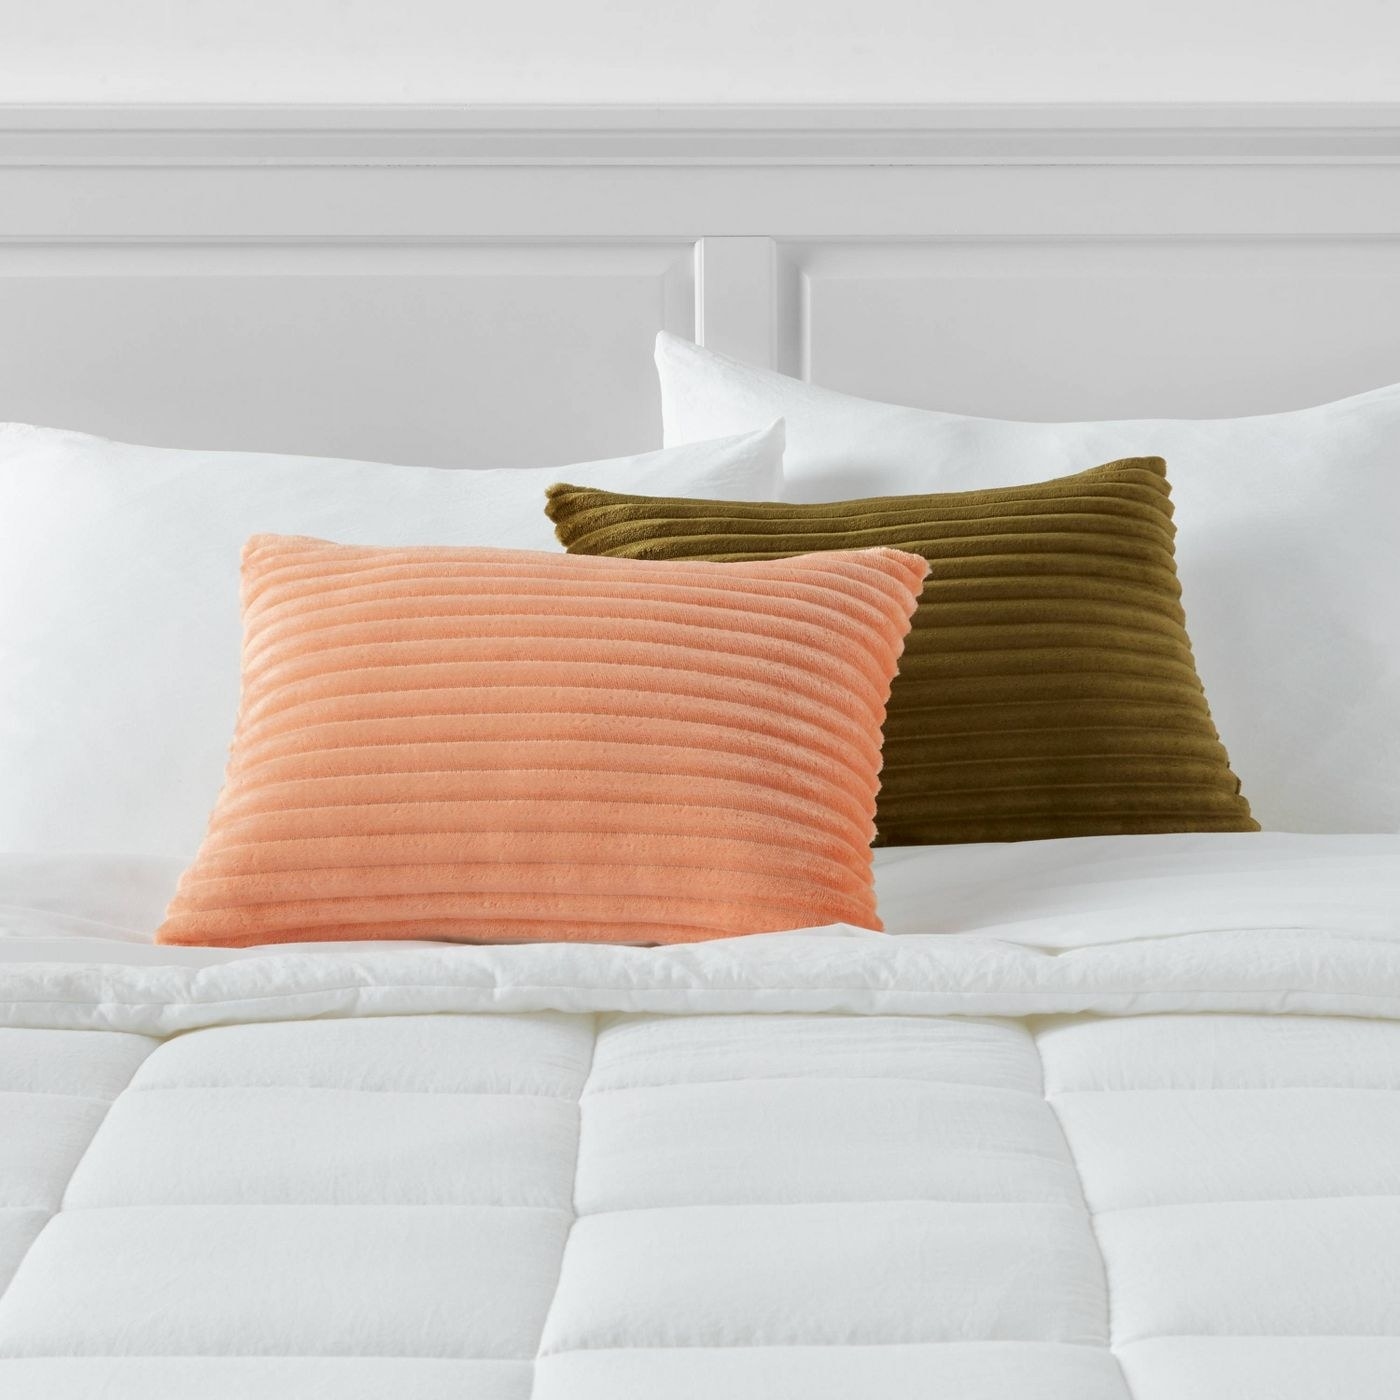 Two plush throw pillows on a bed